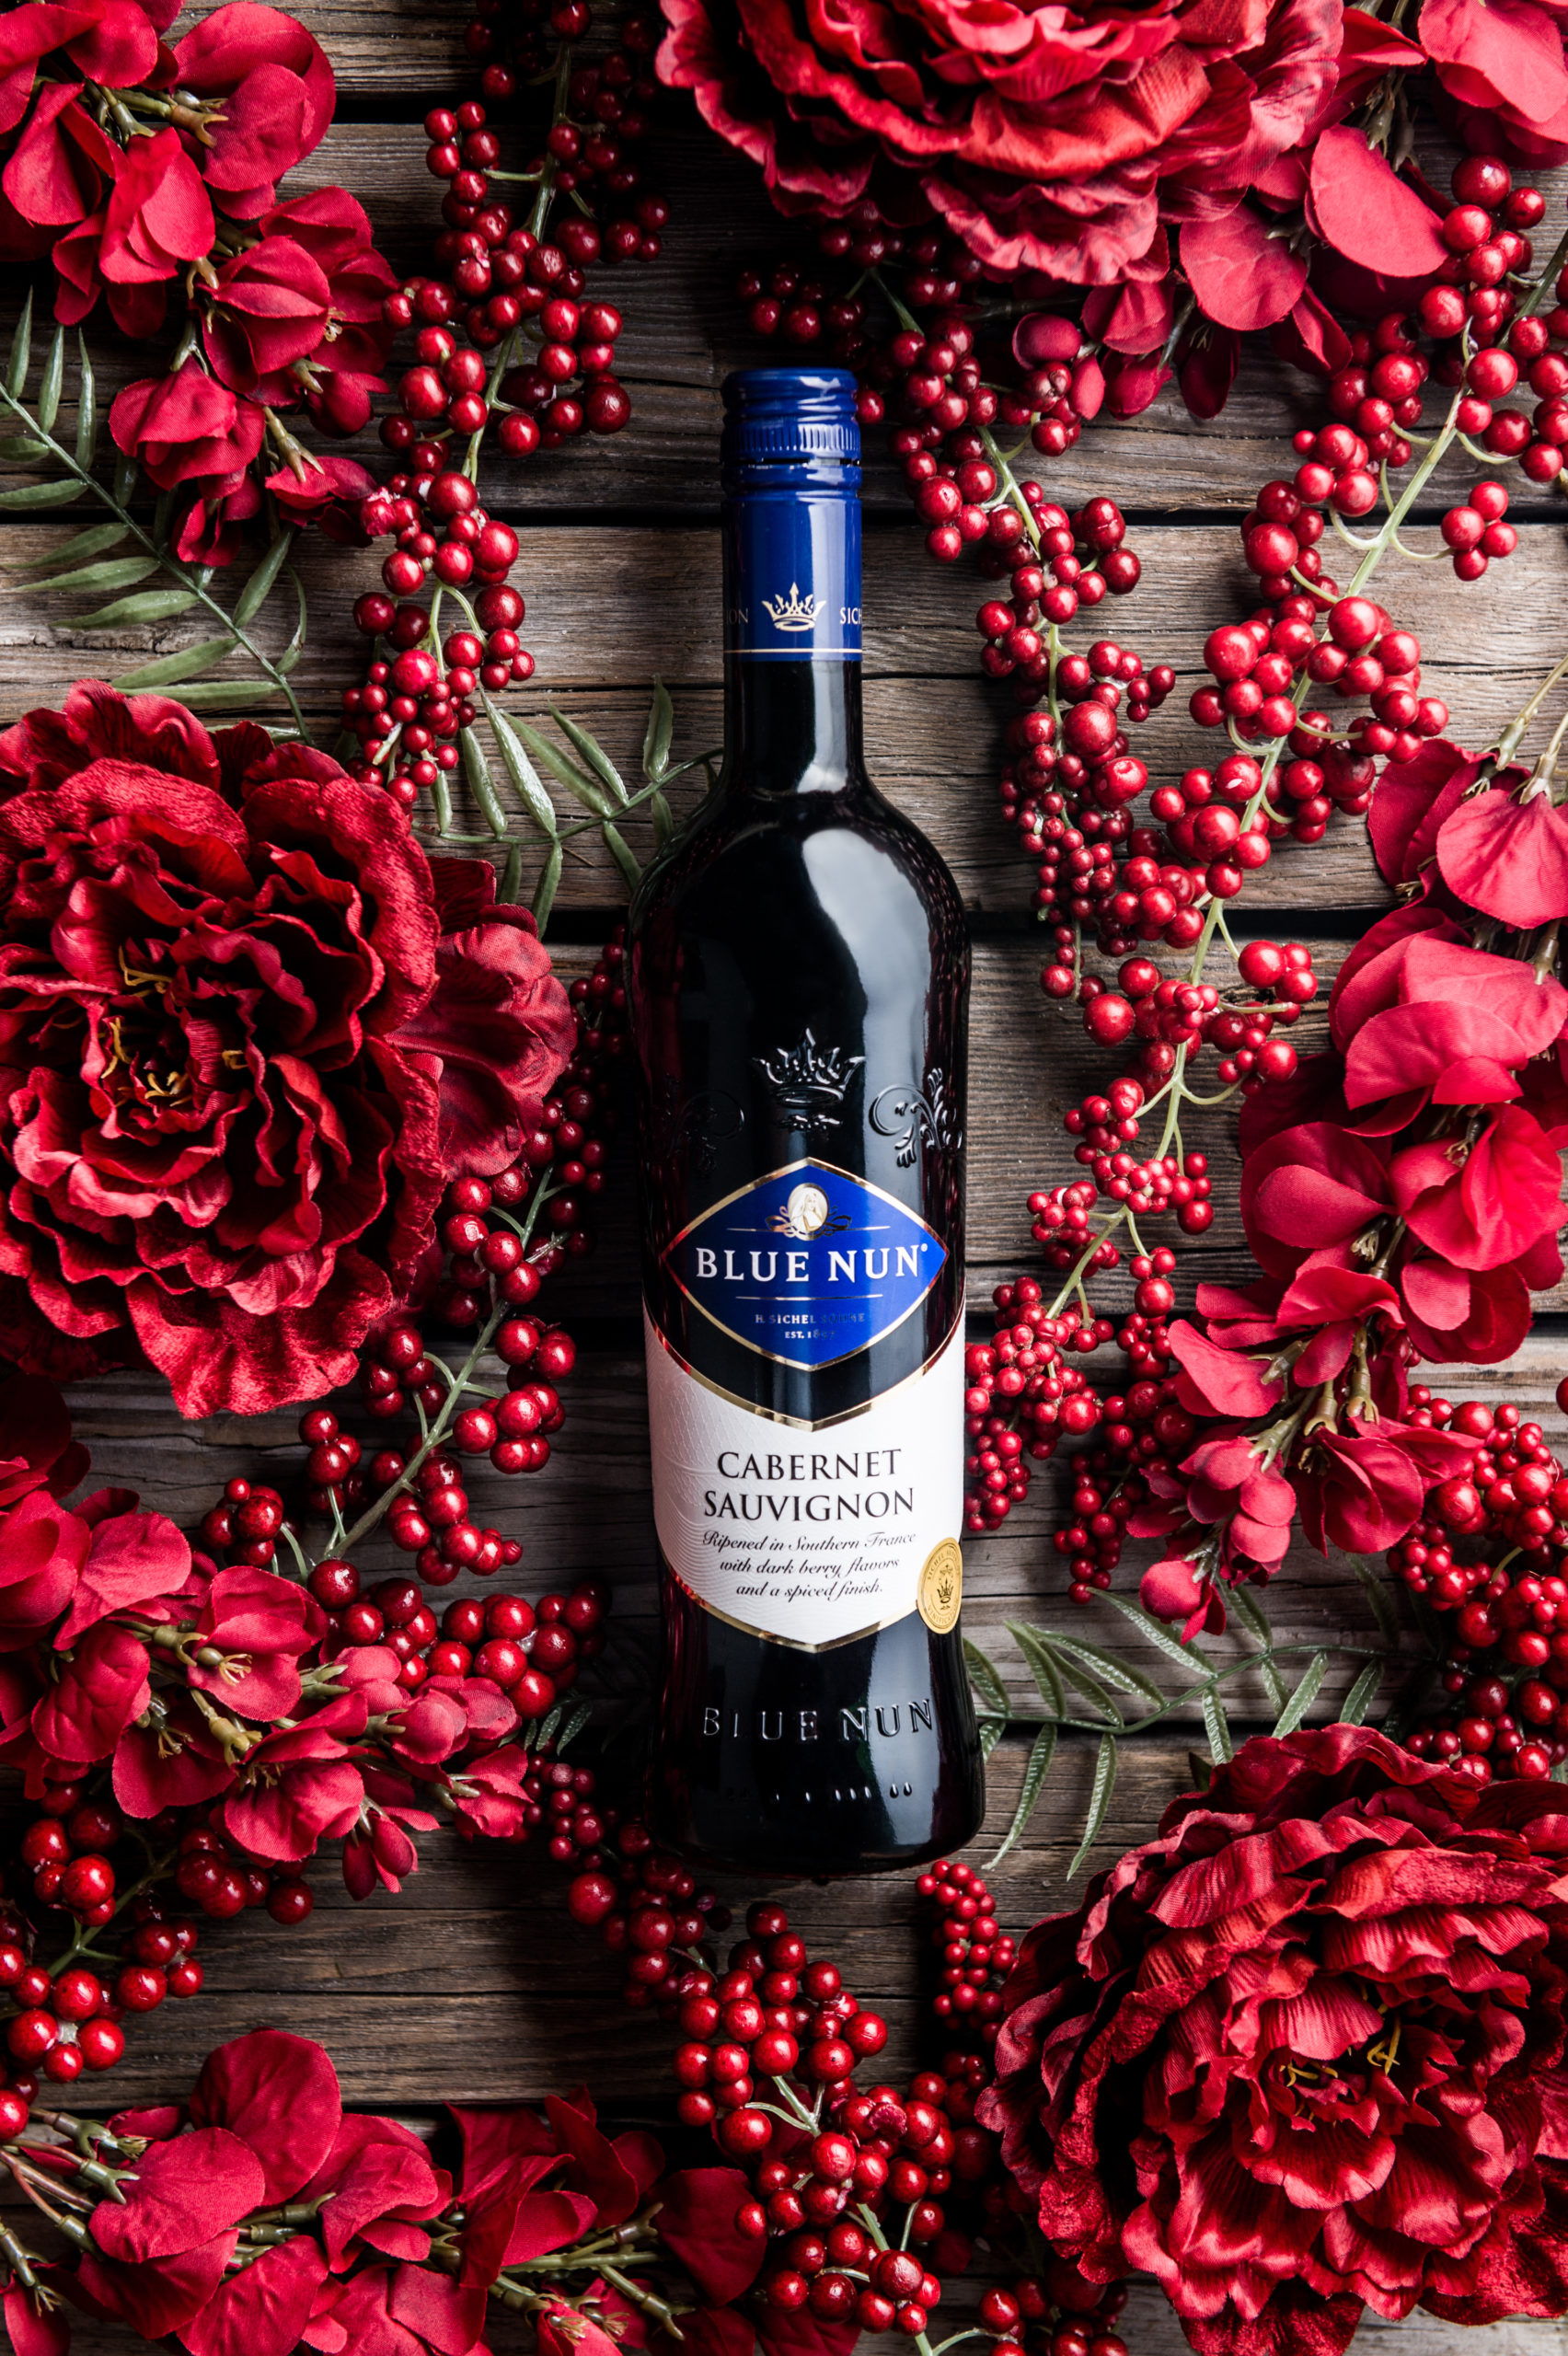 Professional Photography Services to elevate your brand C&I Studios Creative Marketing Blue Nun Cabernet Sauvignon bottle amongst red decorations